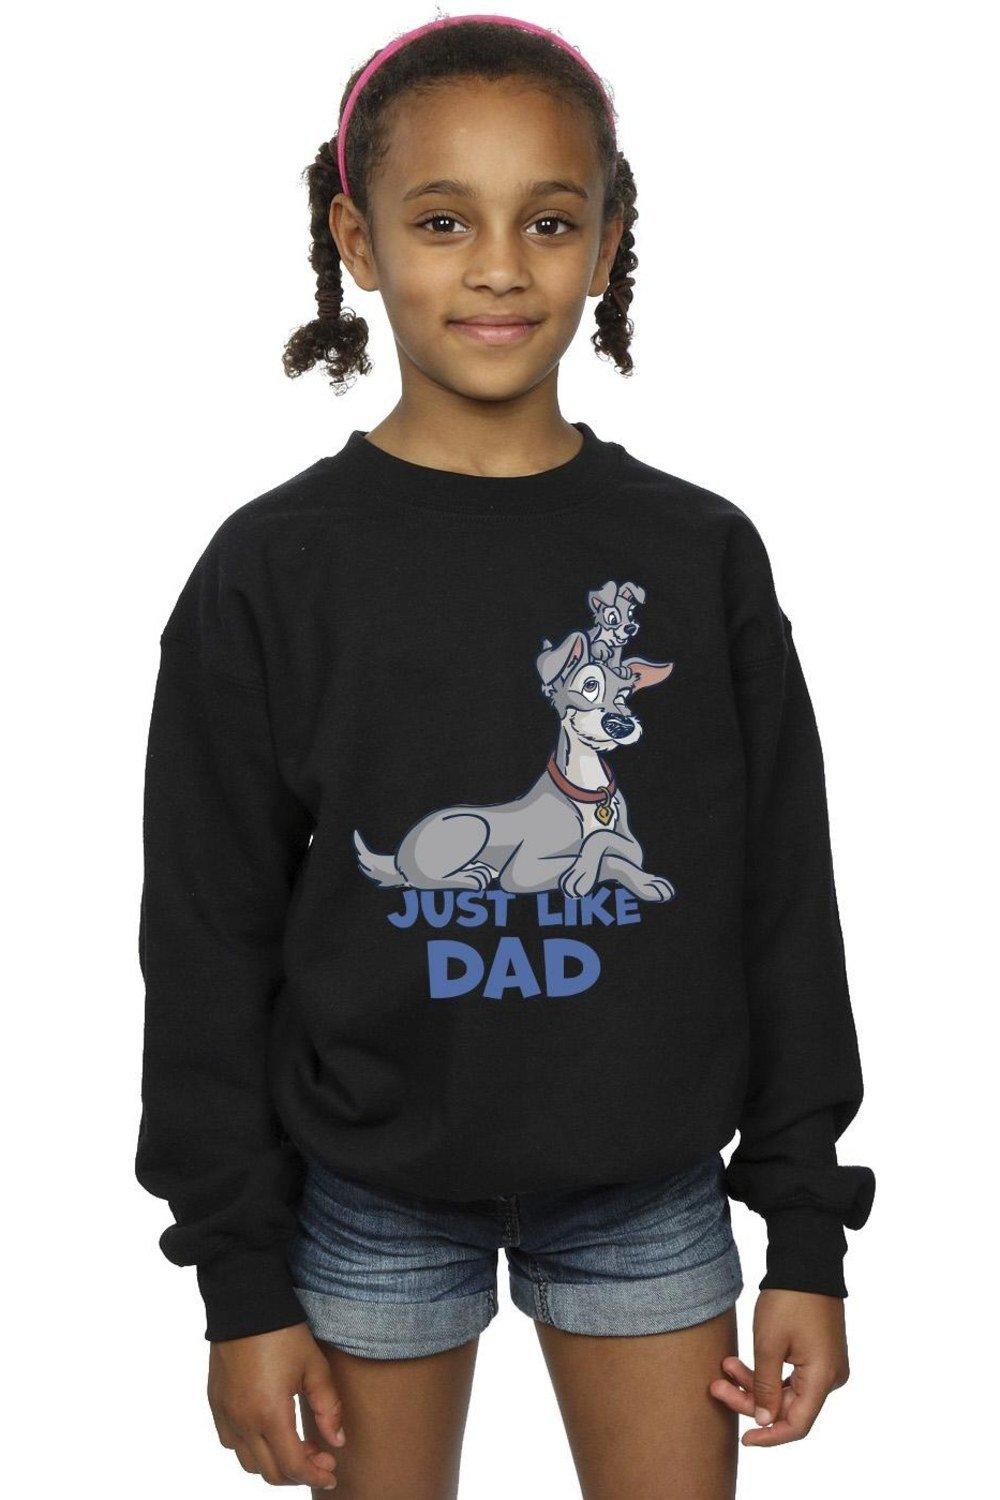 Lady And The Tramp Just Like Dad Sweatshirt